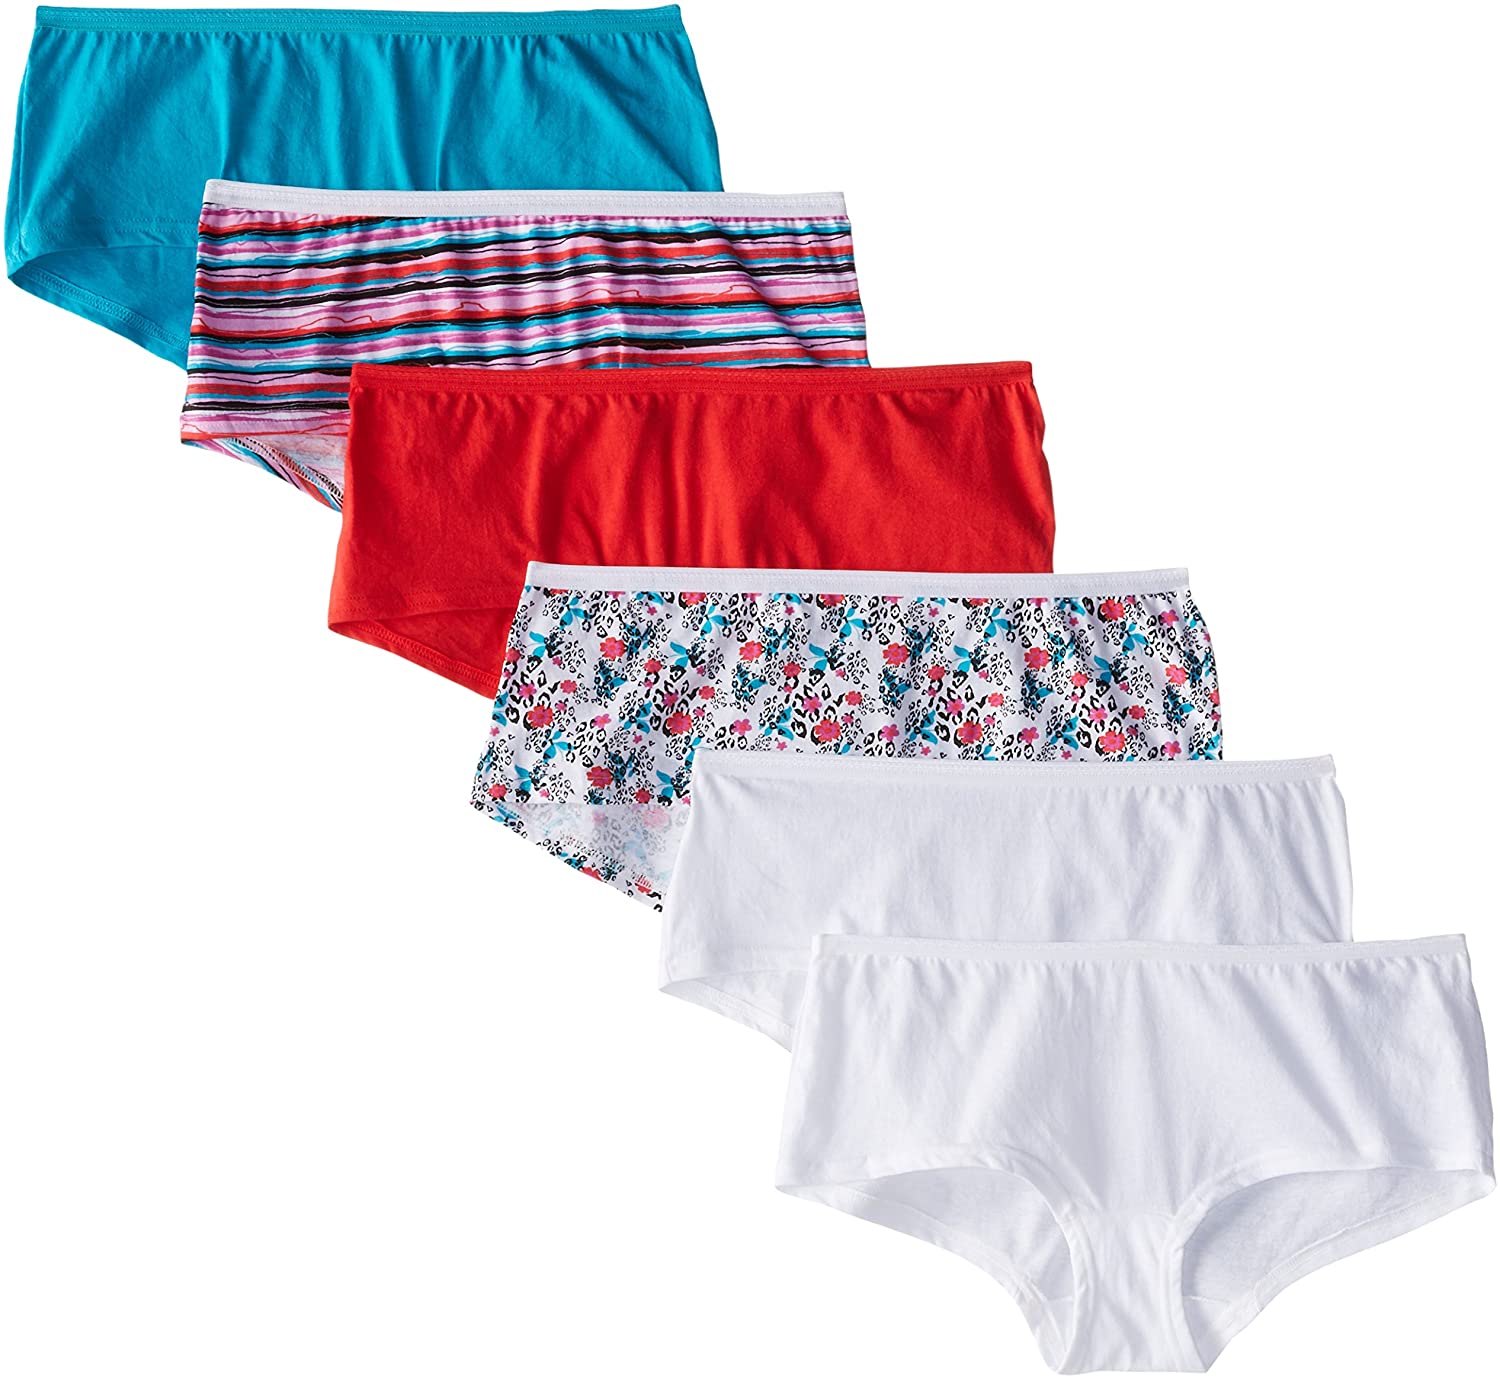 Fruit of the loom panties • Compare best prices now »